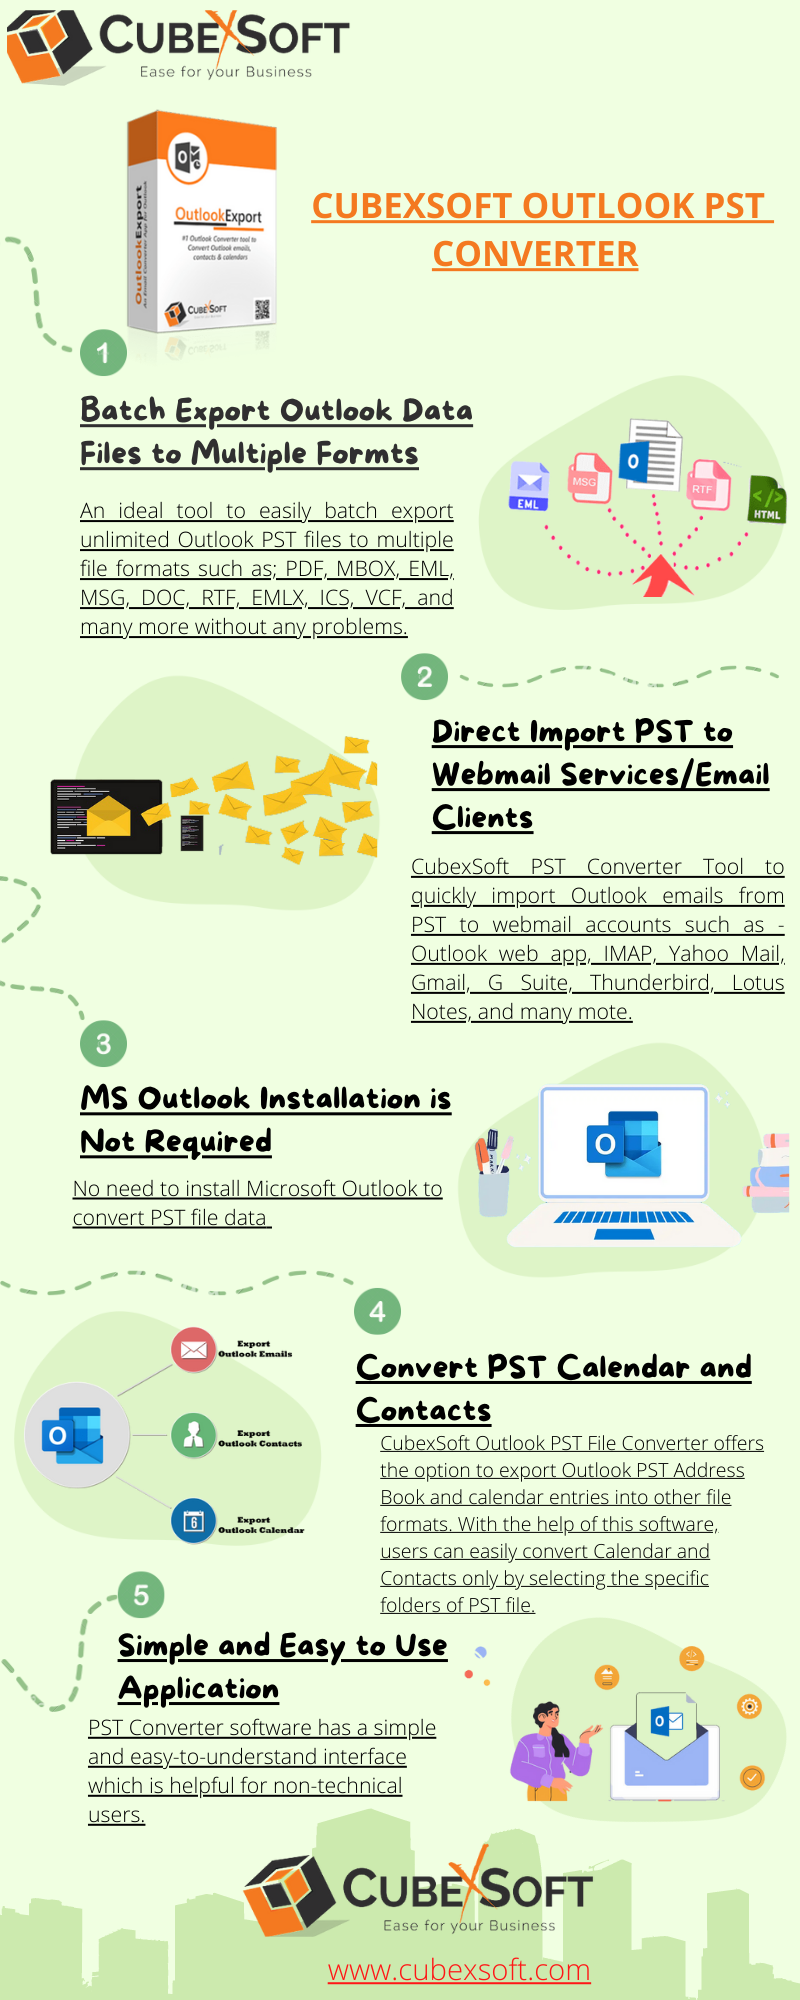 cubexSoft-outlook-pst-converter-infographic.png